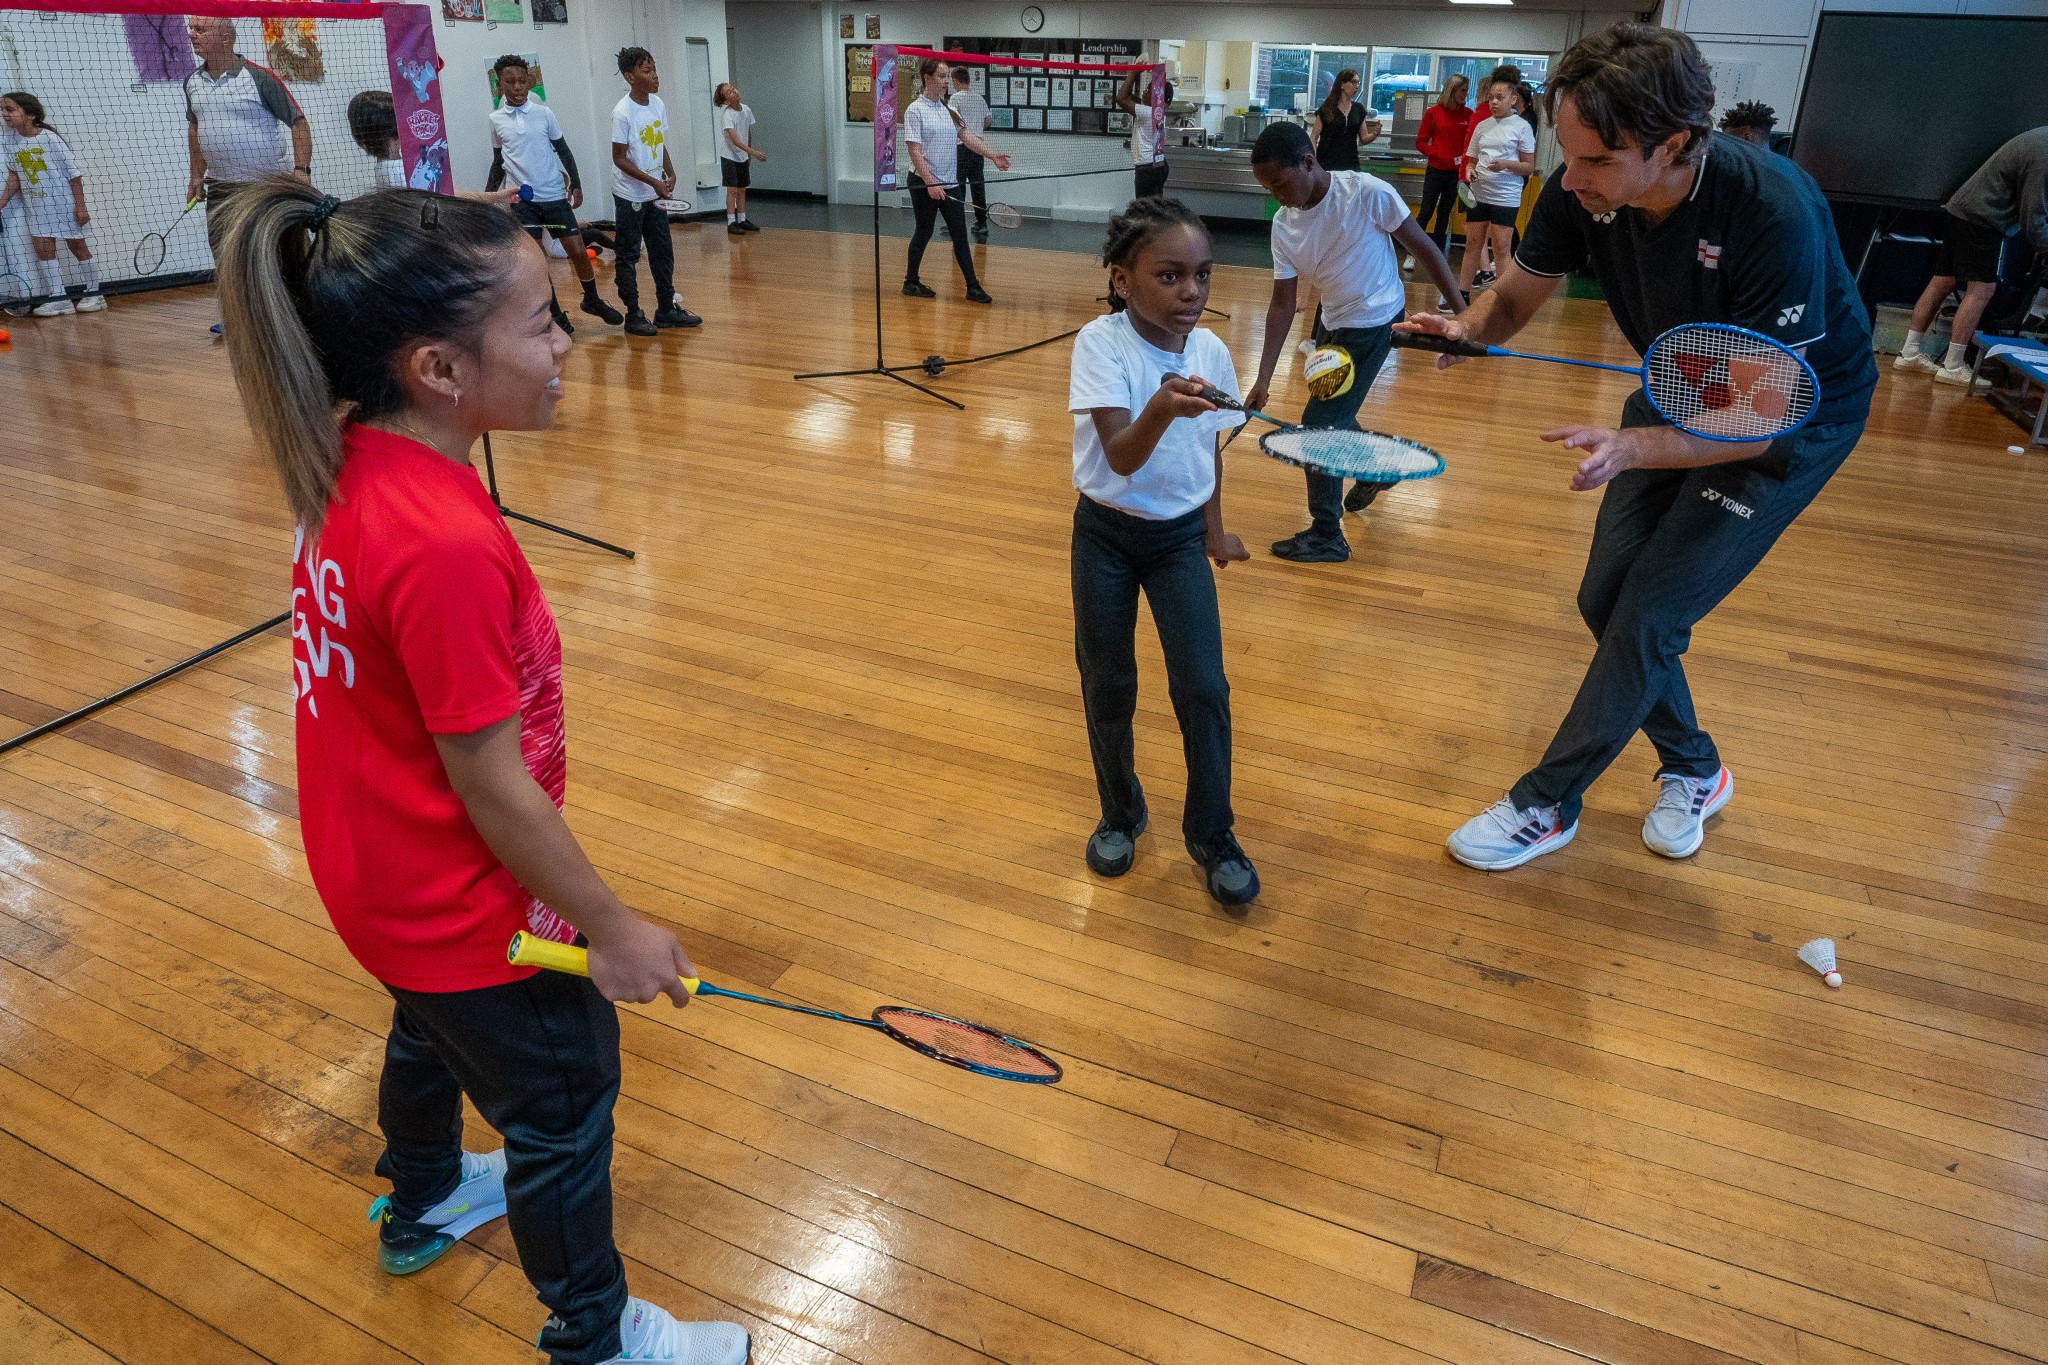 
Rachel Choong, left, and Nathan Robertson, right, in conversation with children from St Francis R C Primary School in Manchester at the launch of Badminton England's new strategy ©Badminton England